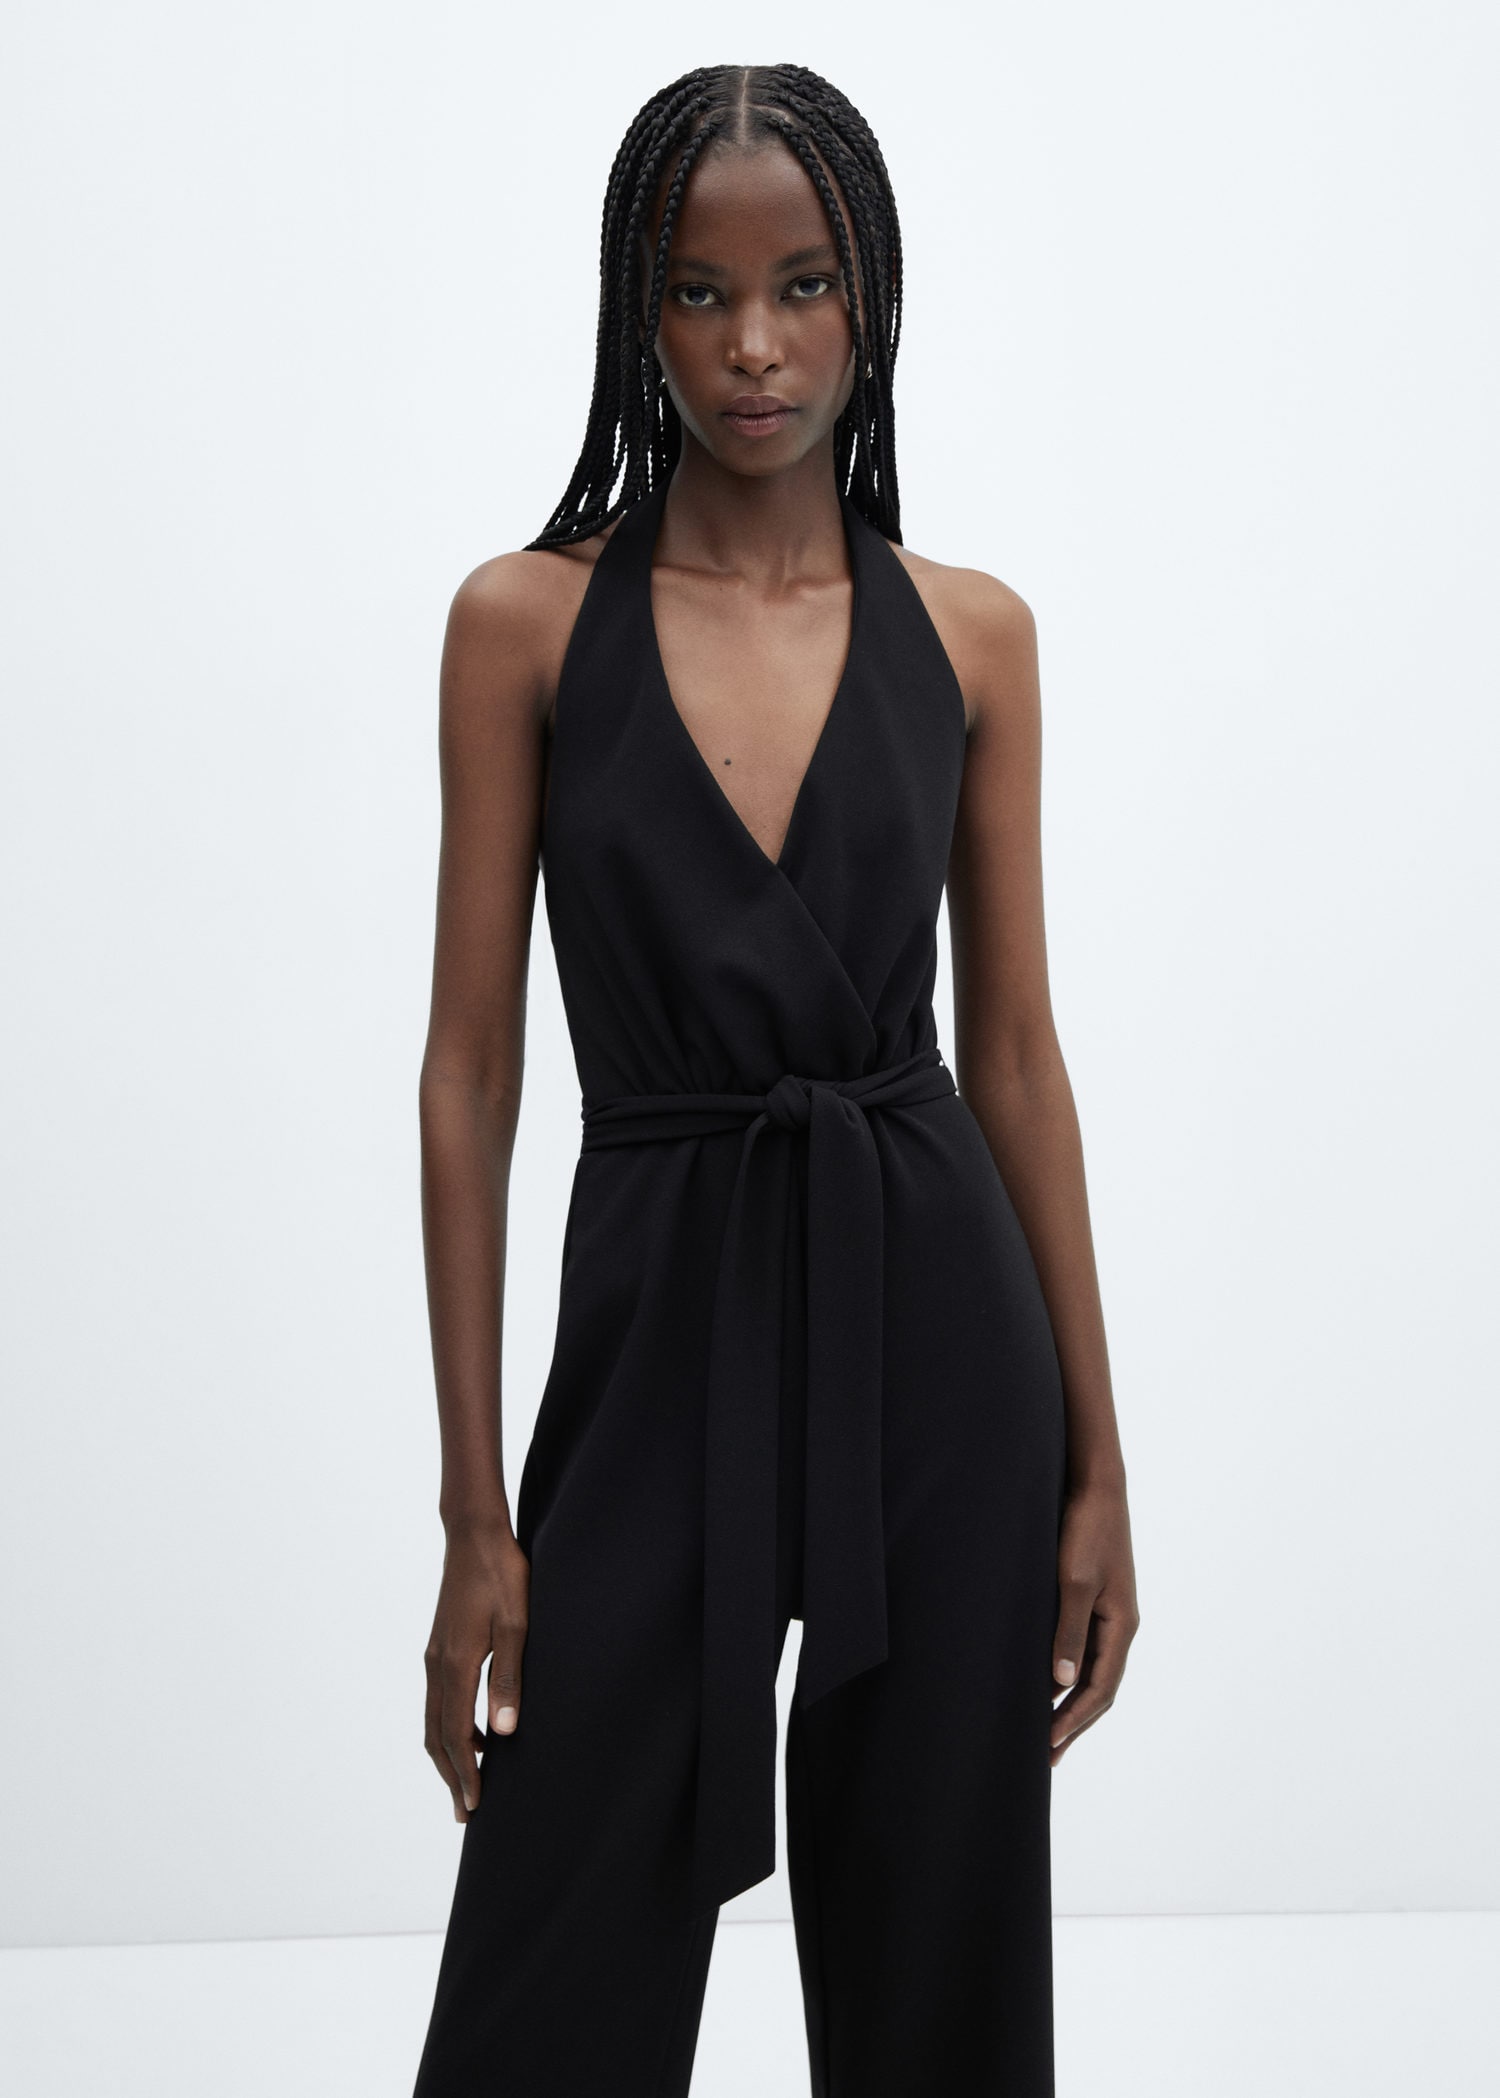 Halter jumpsuit with bow detail